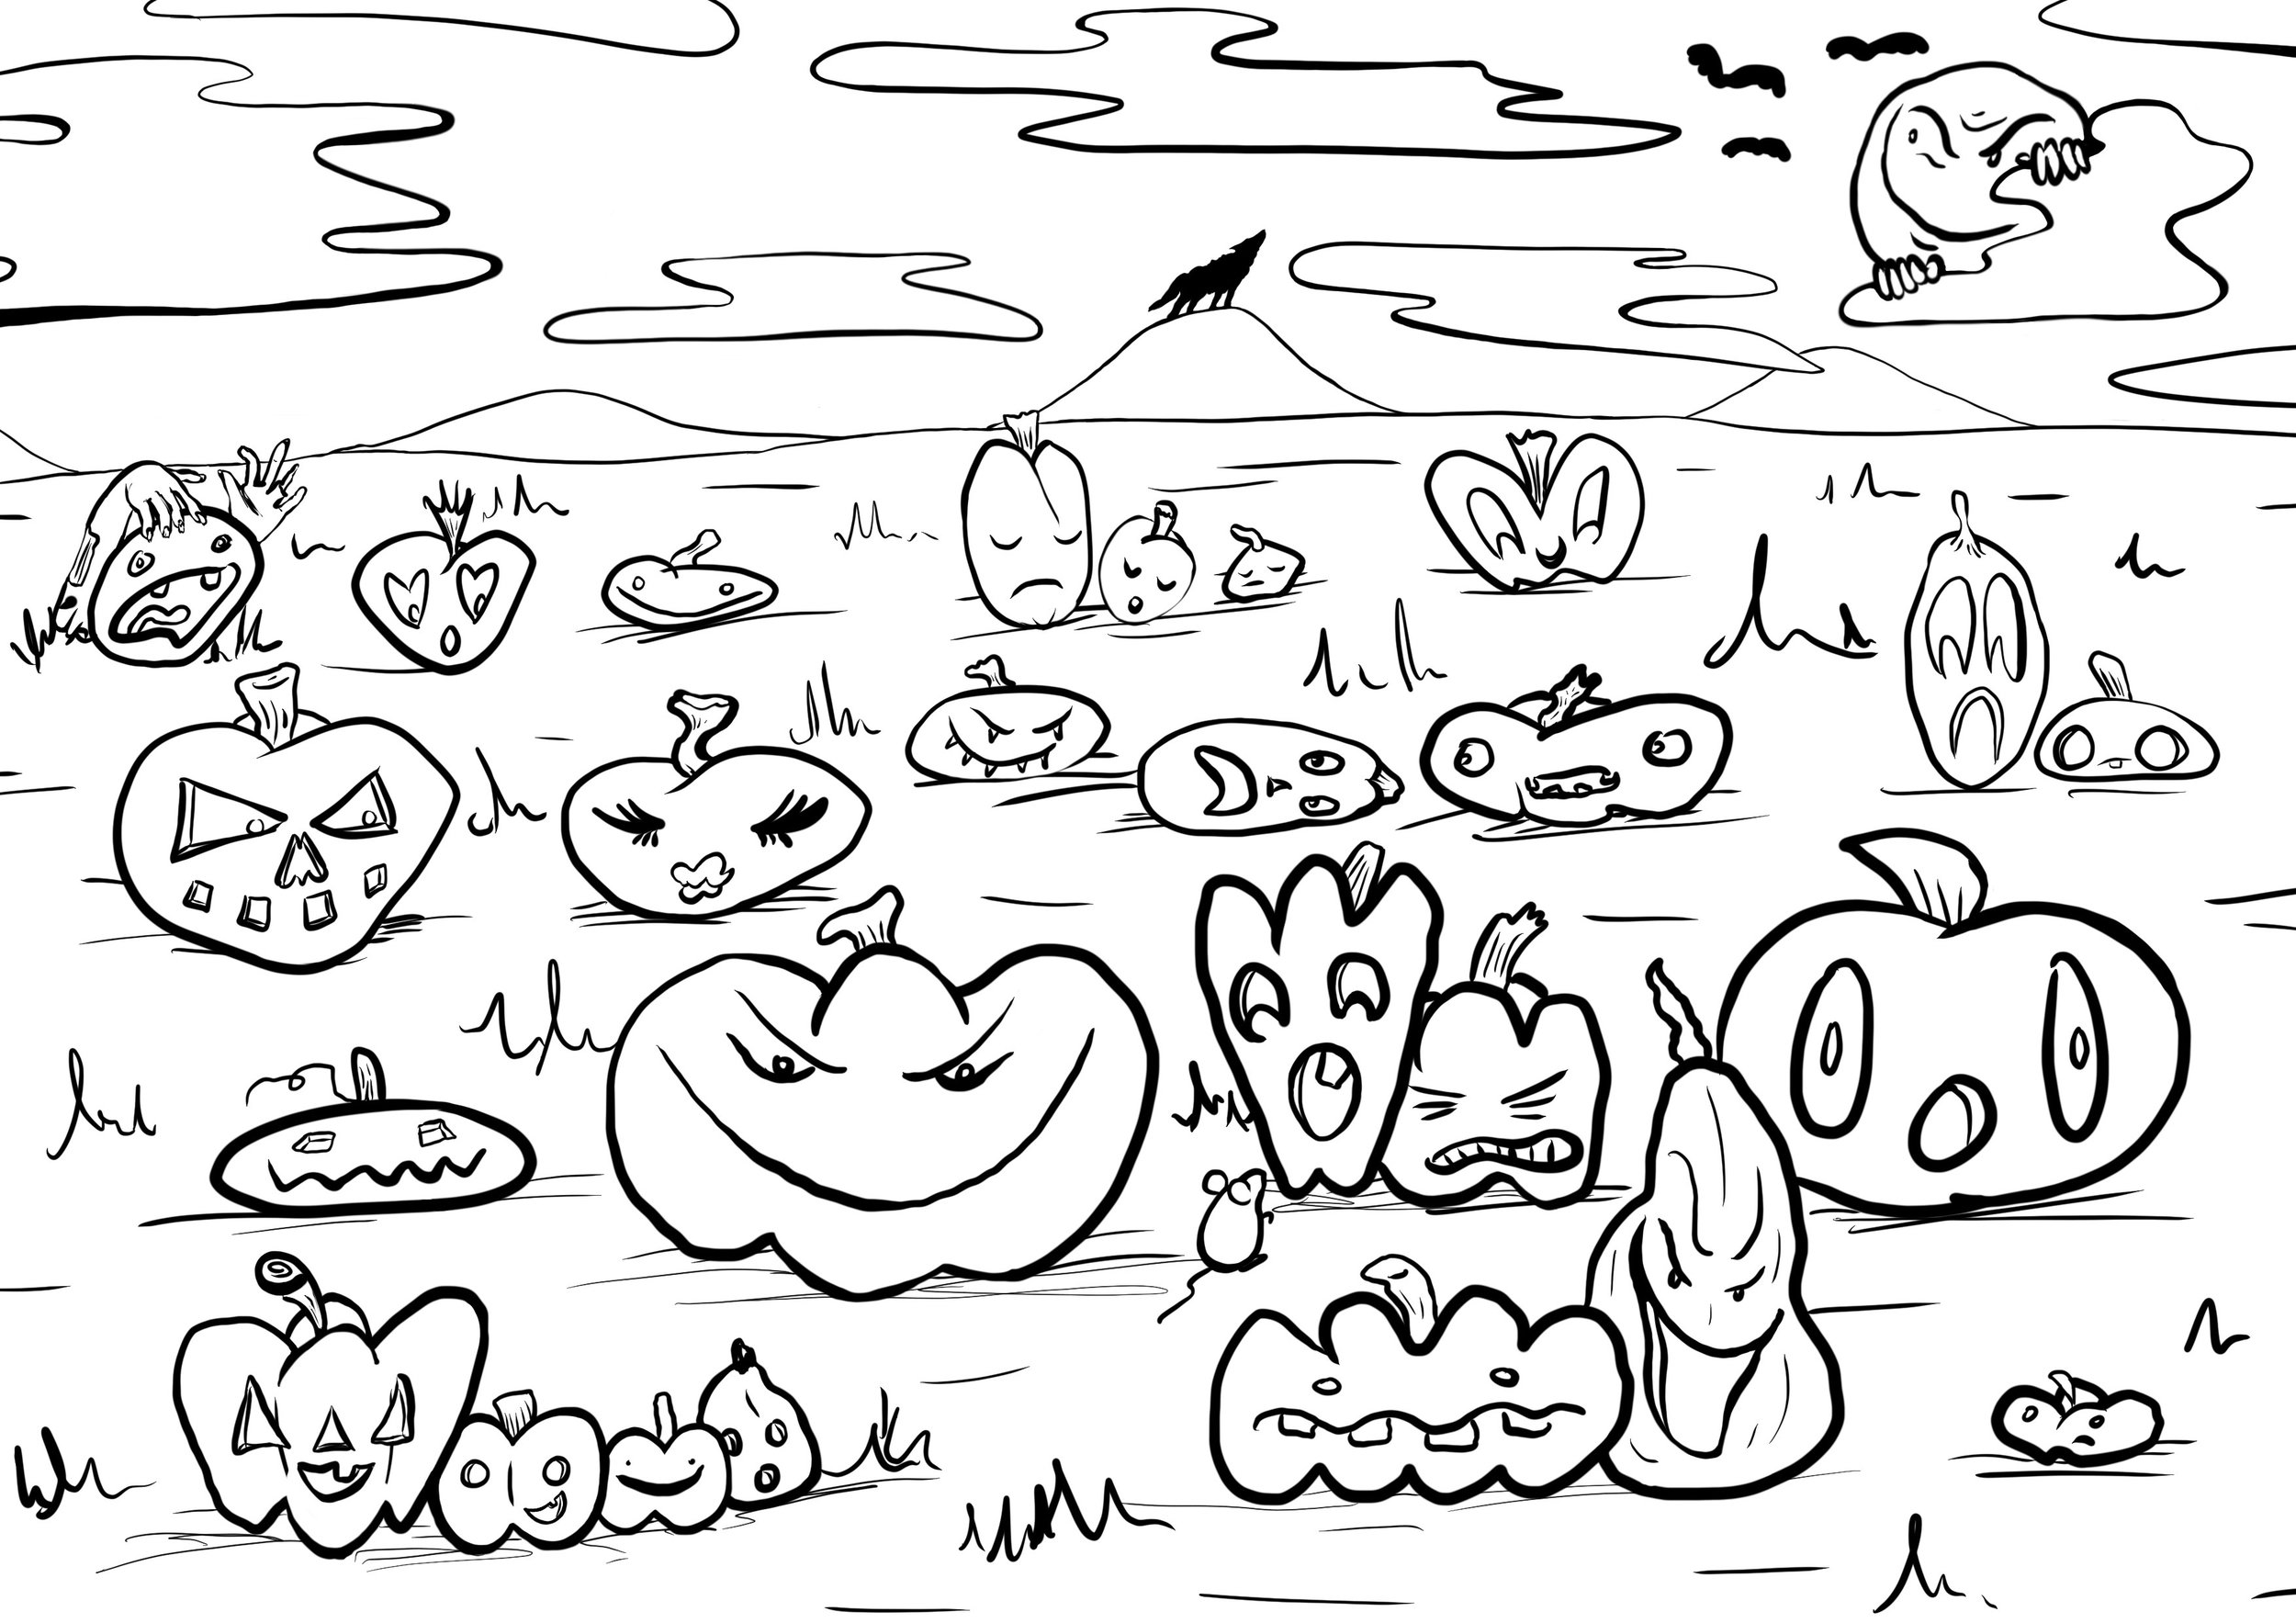  Spread for printed Halloween Coloring Book Zine. Collaborative project with The Crybaby Collective. 2016 